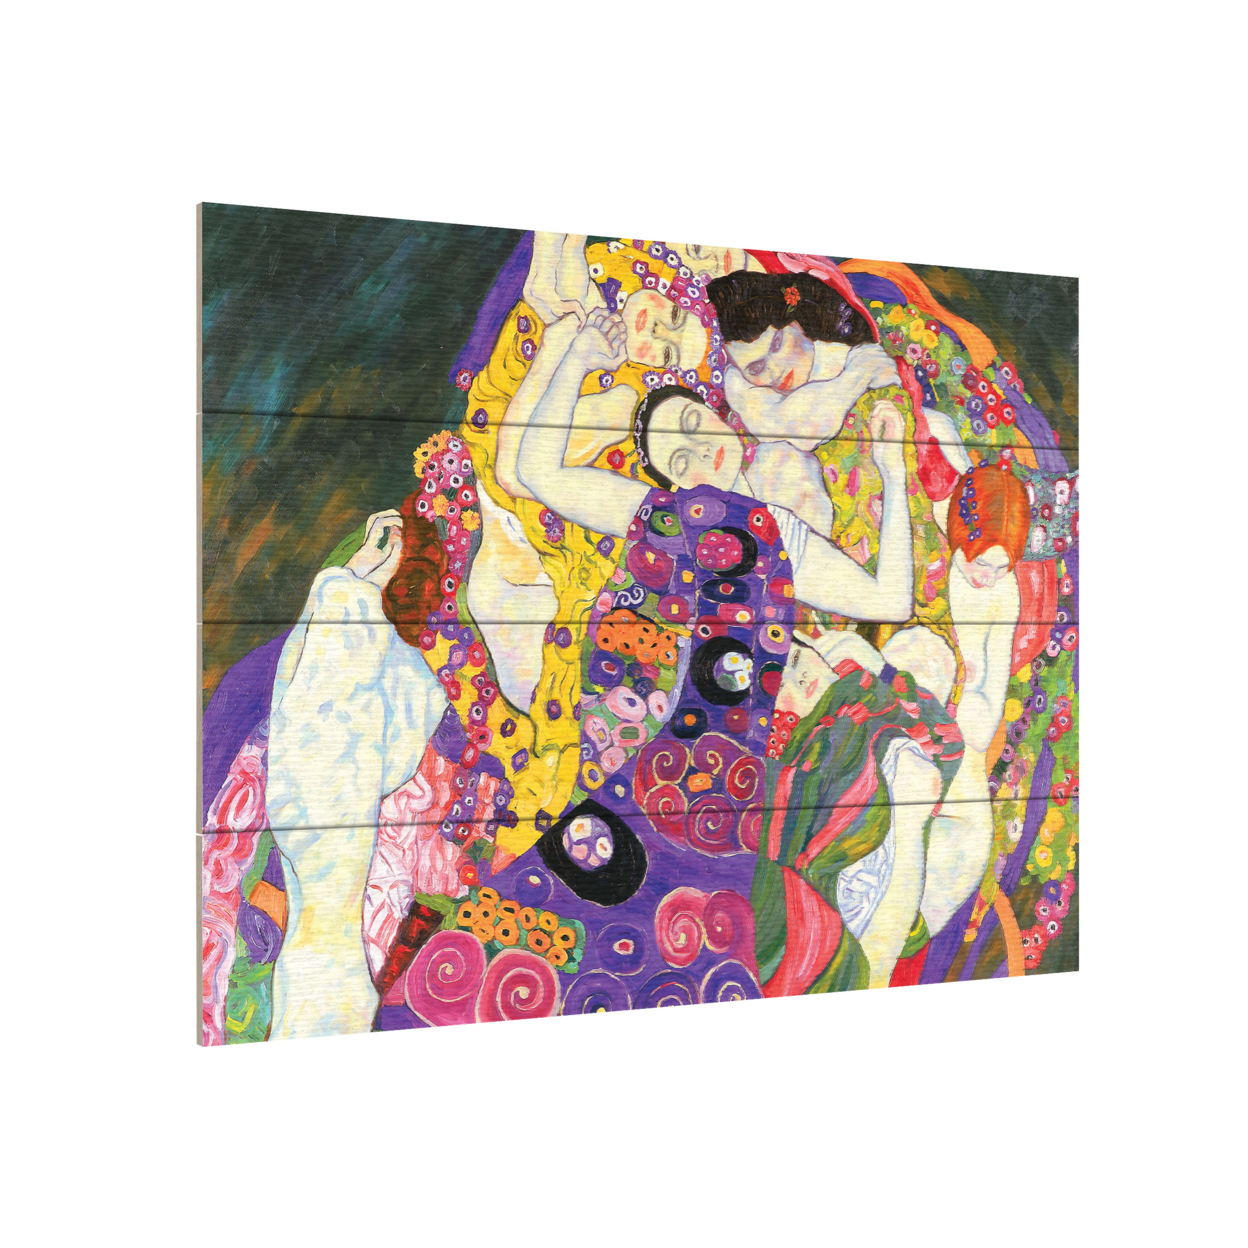 Wall Art 12 X 16 Inches Titled Virgins Ready To Hang Printed On Wooden Planks